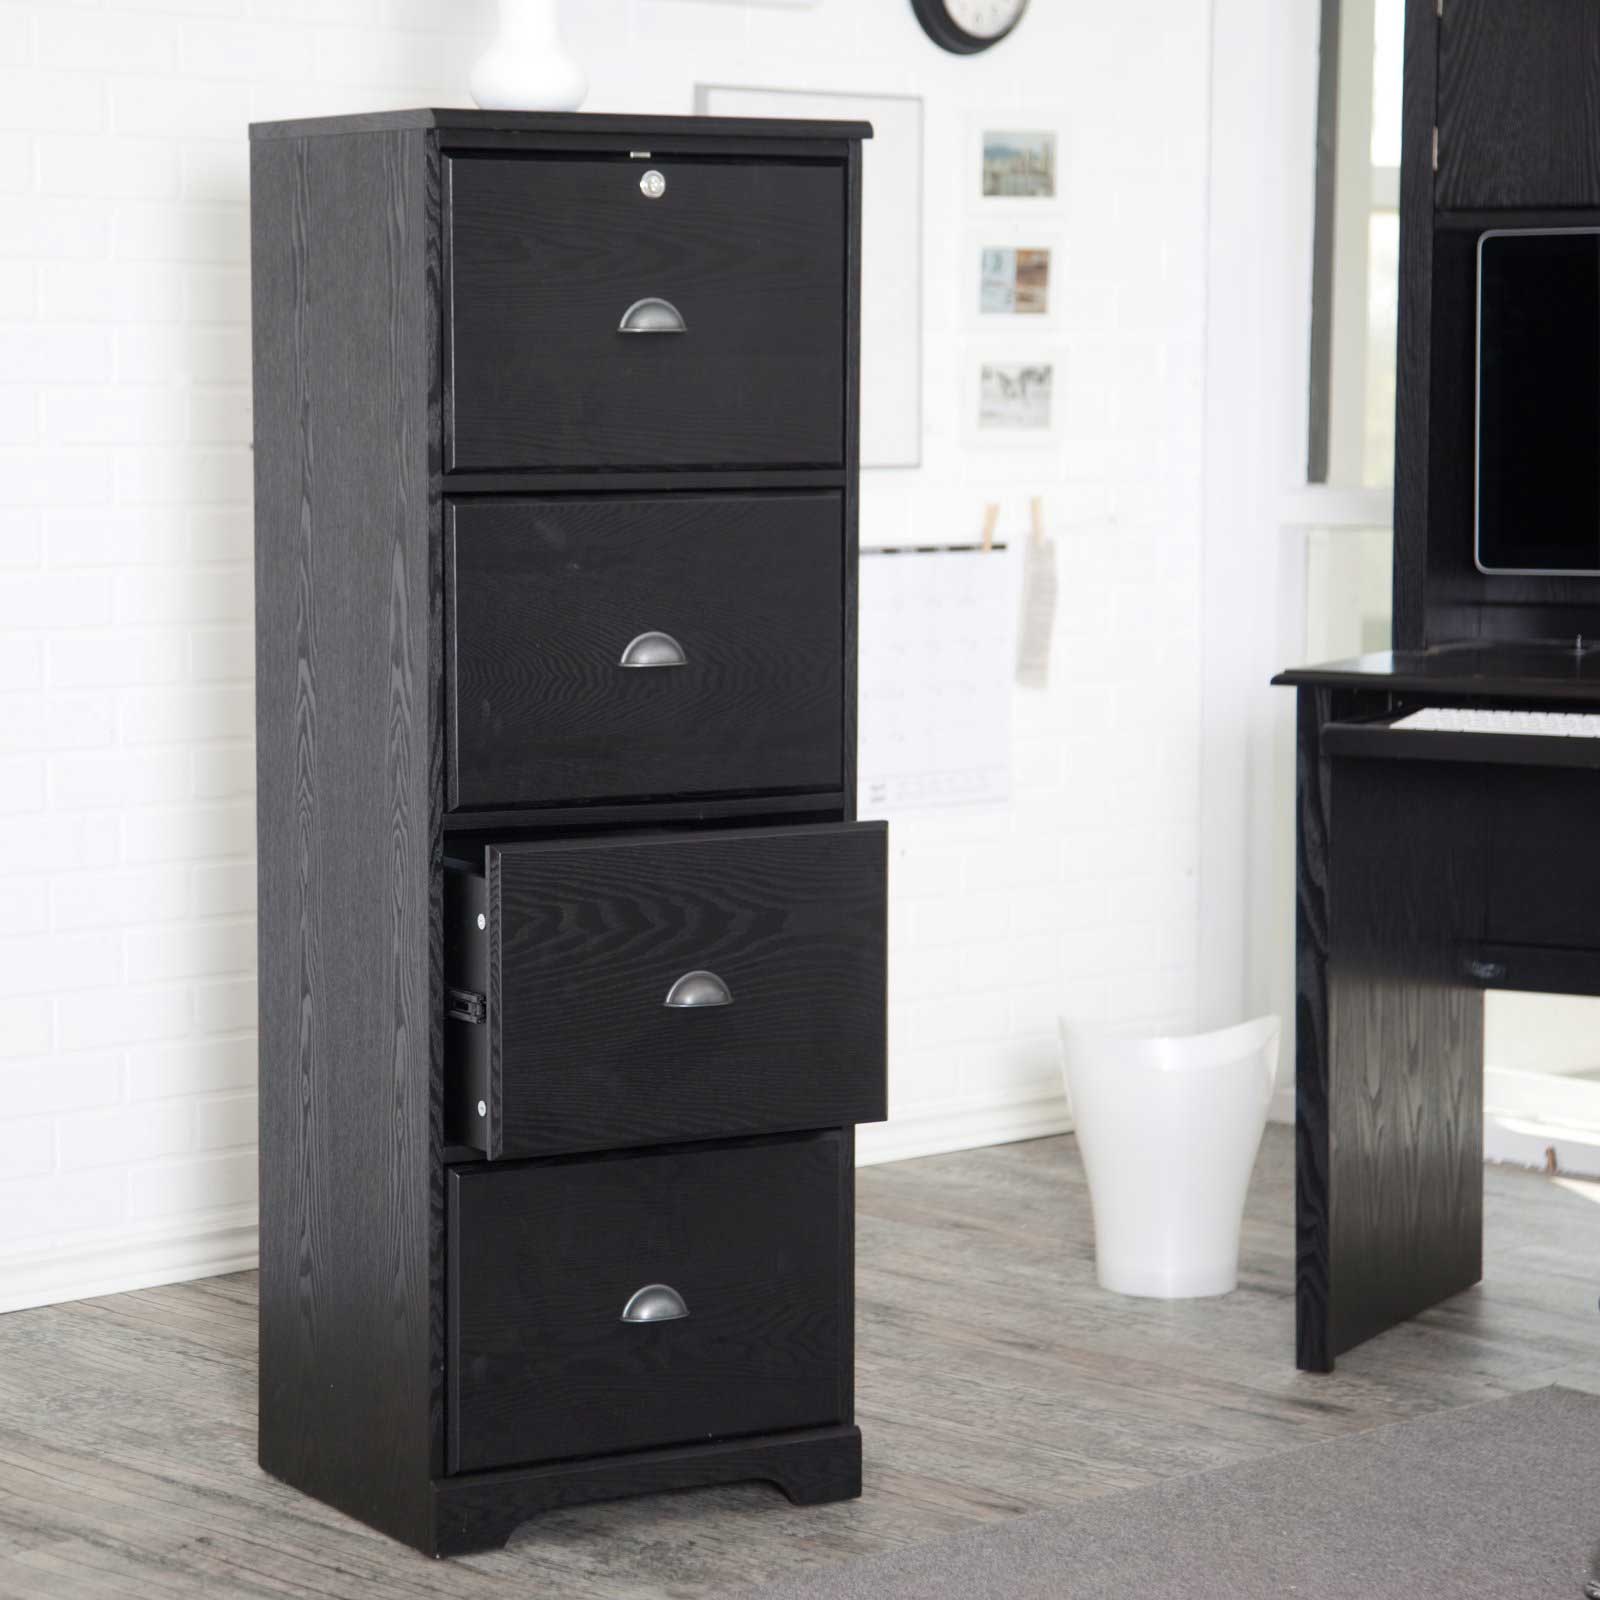 Types of File Cabinets for a Home Office | Ideas 4 Homes
